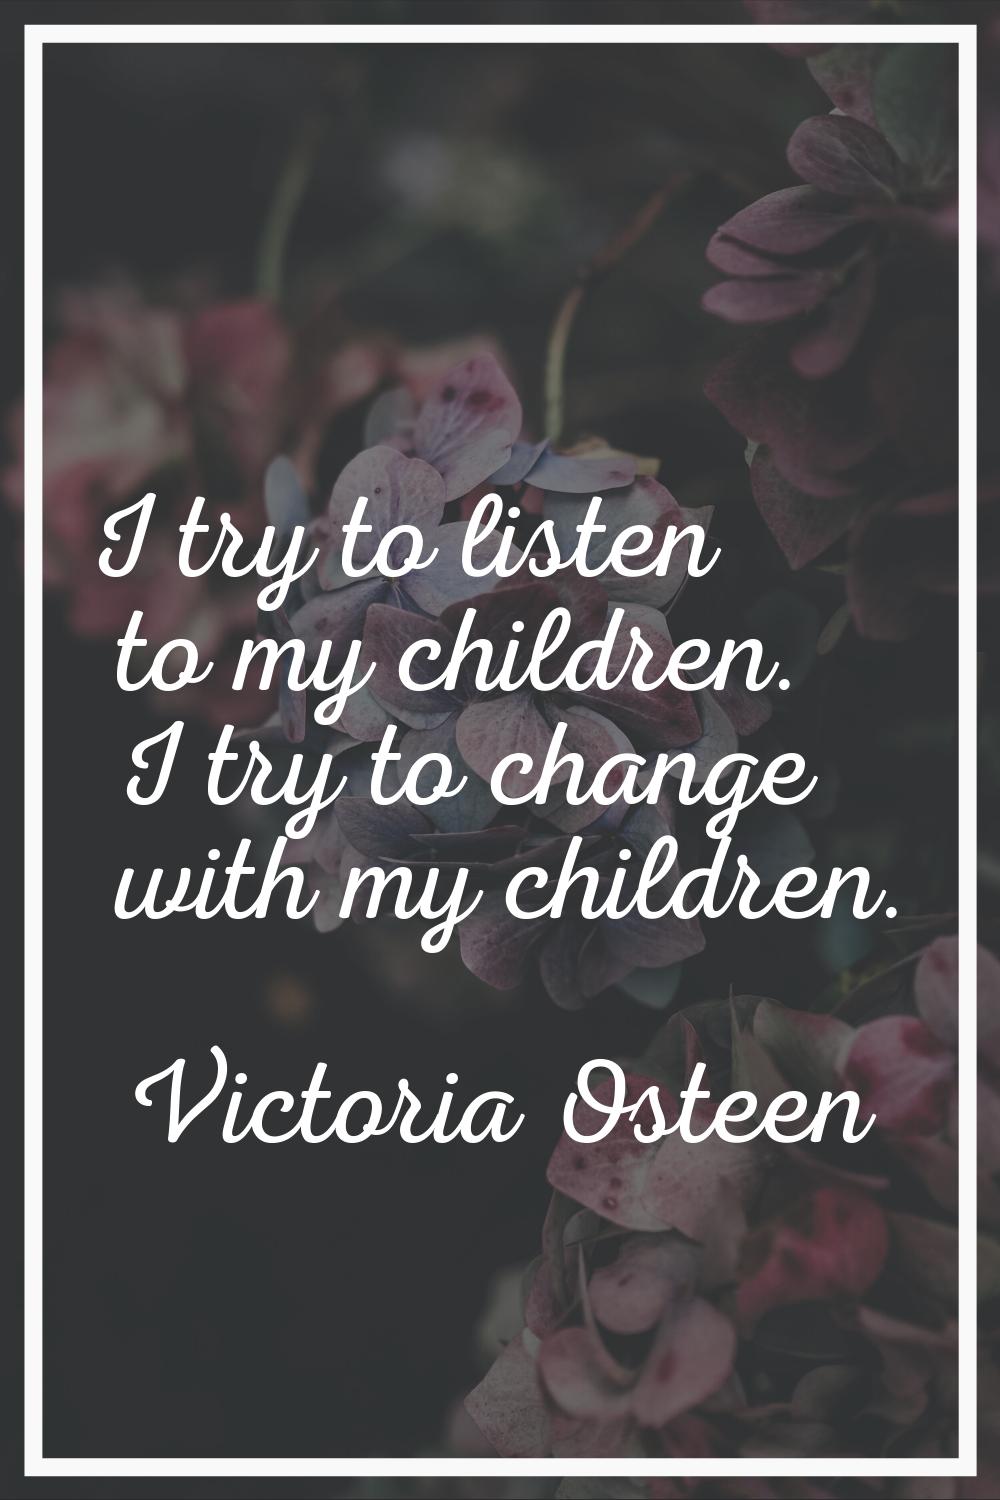 I try to listen to my children. I try to change with my children.